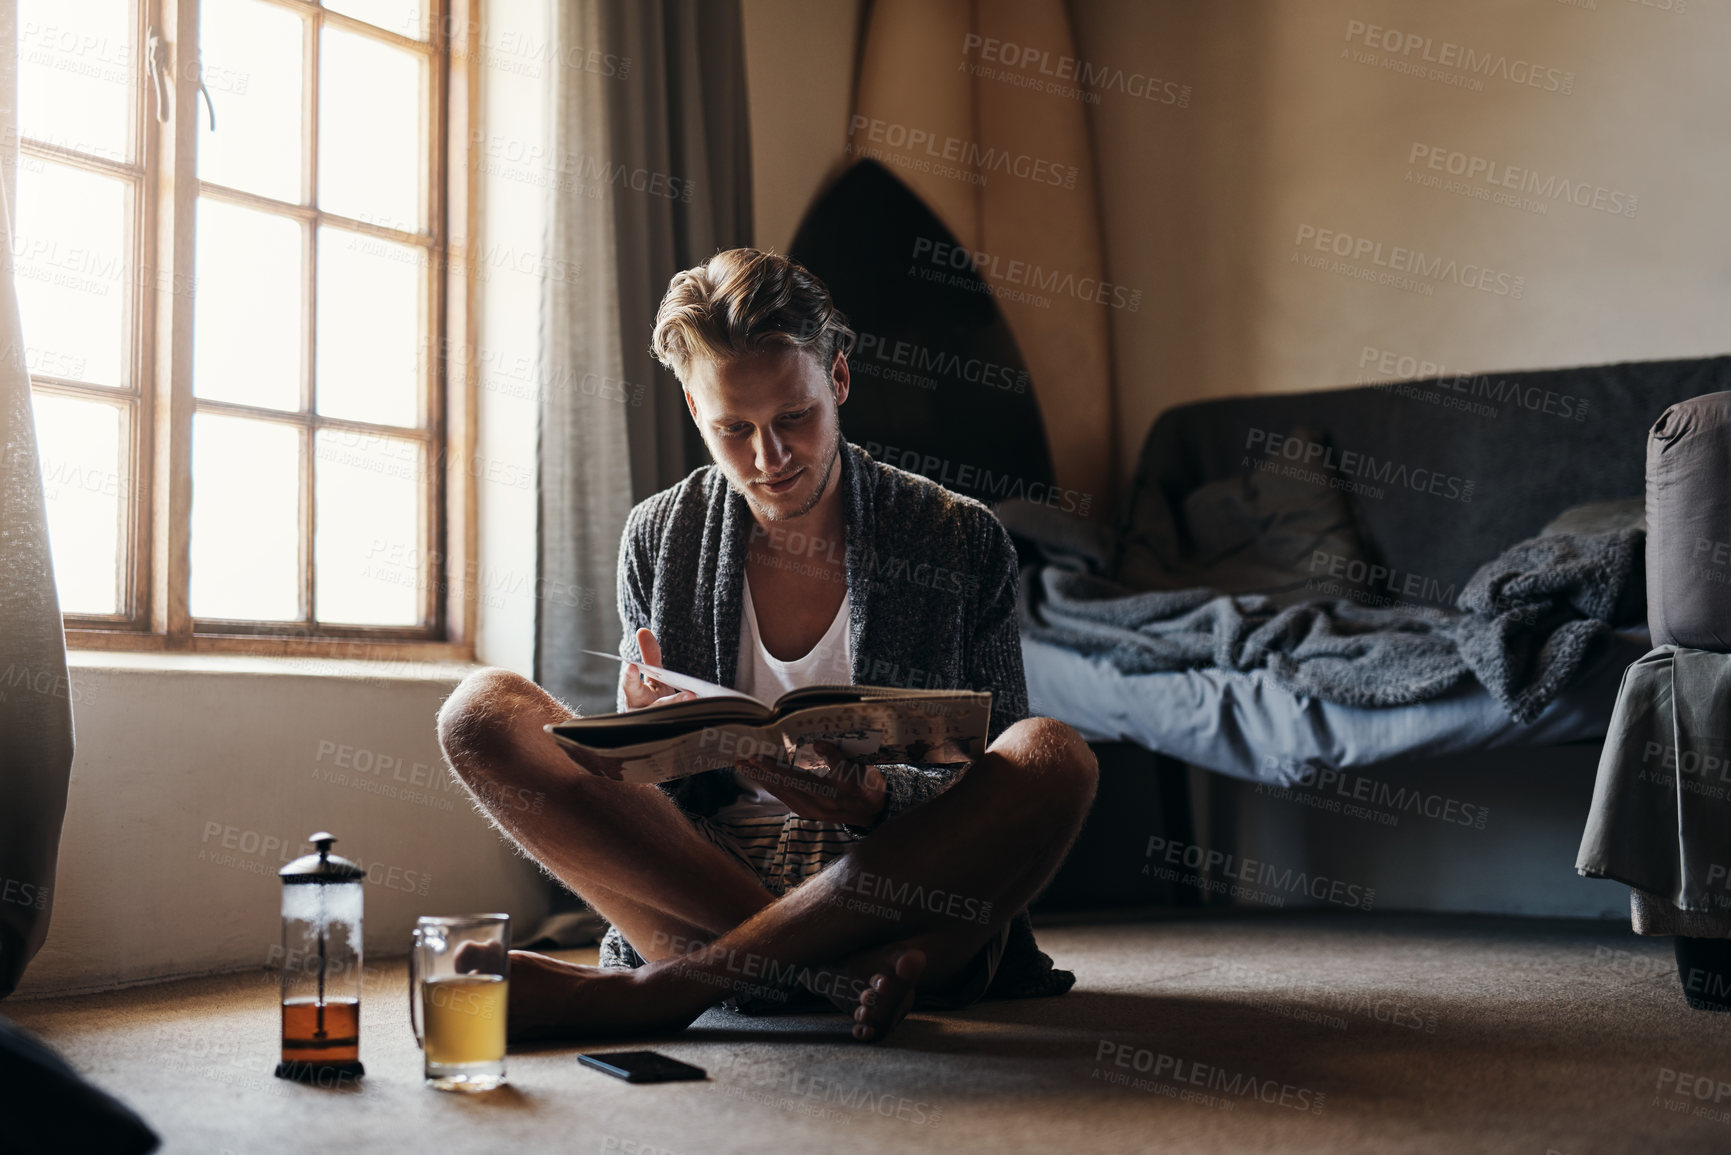 Buy stock photo Shot of a young man reading a book while sitting on the floor at home